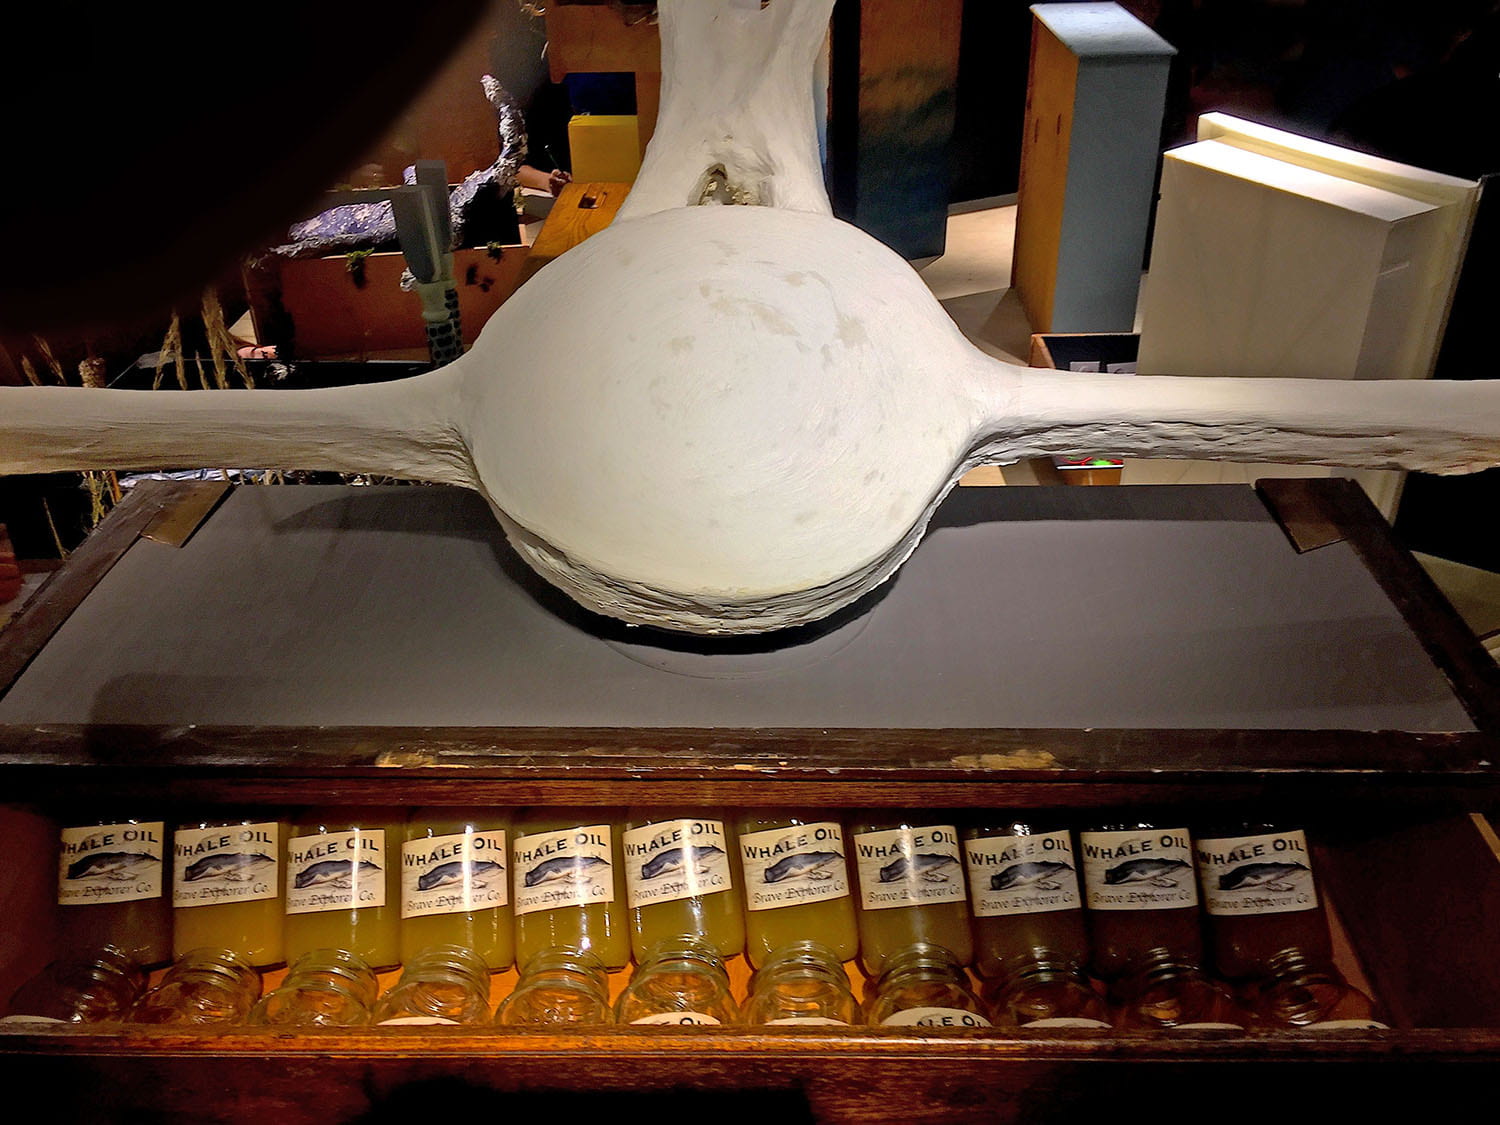 A table containing a round ceramic structure with long arms. Below it, an open drawer displays several jars of whale oil